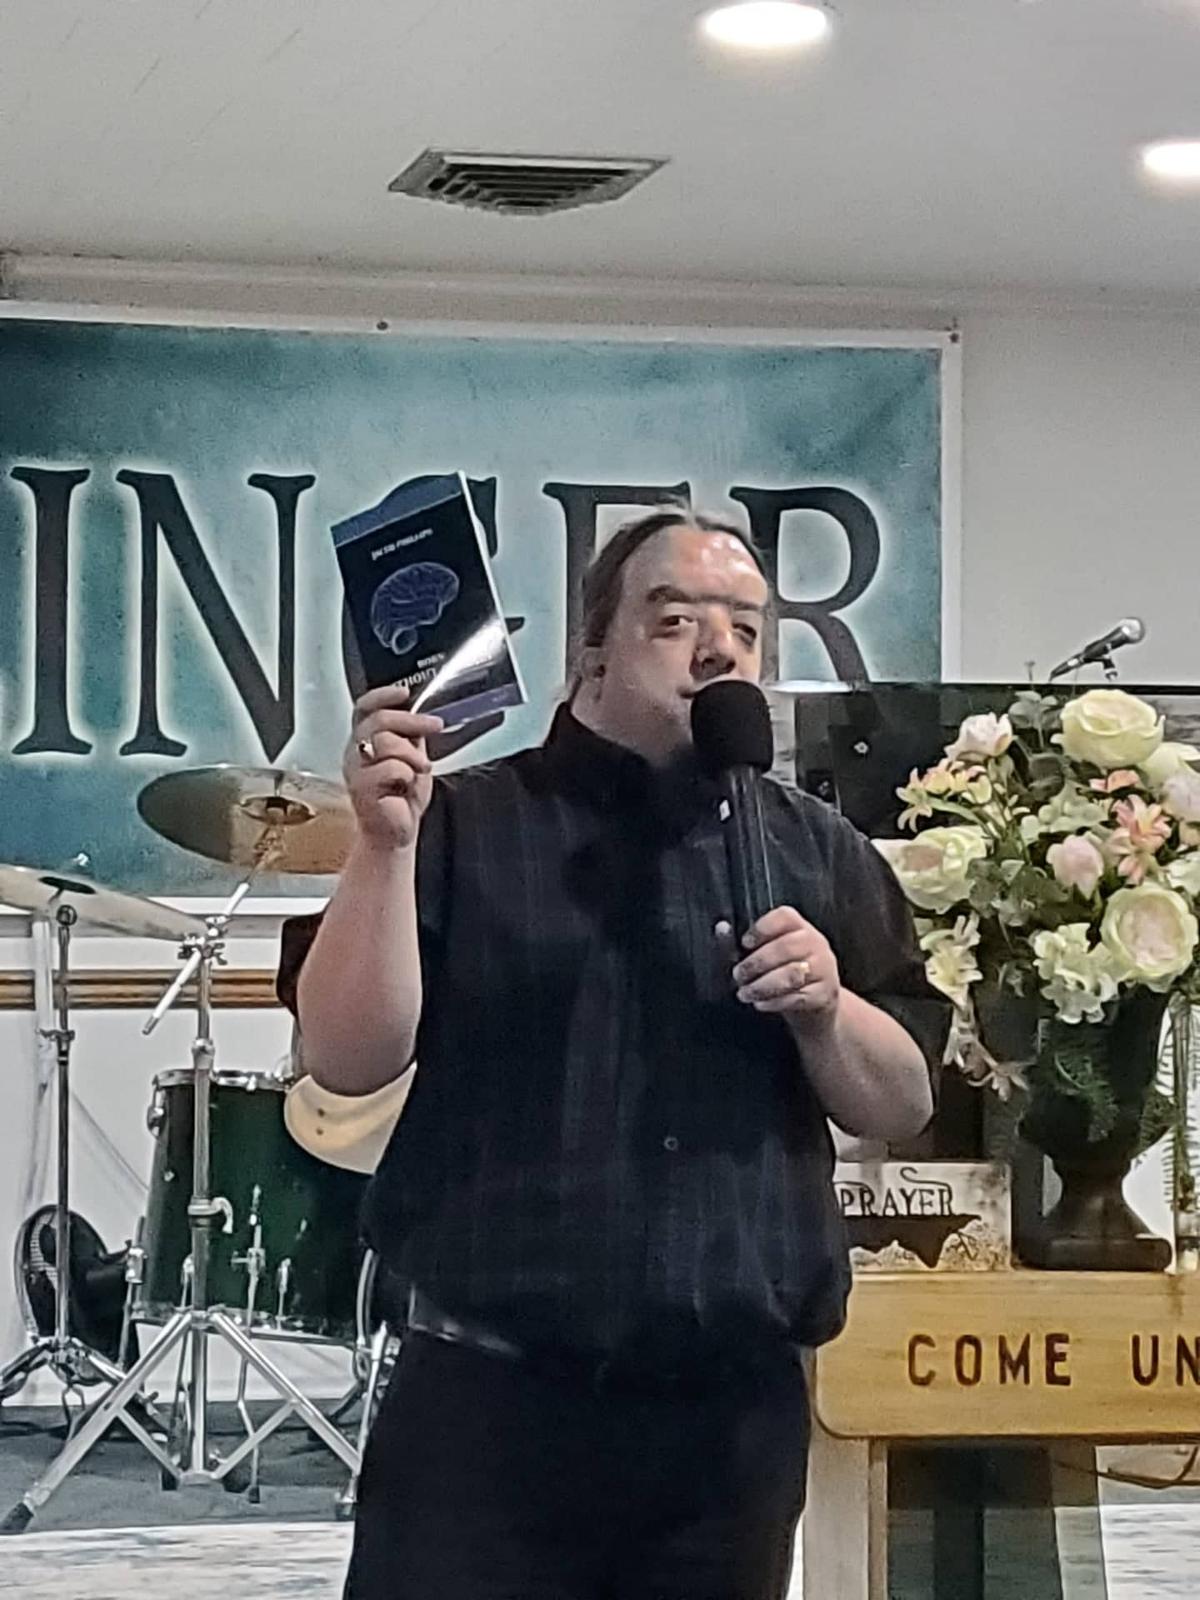 Phillips at a church introducing his book, "<a href="https://www.amazon.com/Born-Without-Brain-Story-Phillip/dp/1948747103">Born Without a Brain</a>." (Courtesy of Jacob Phillips)